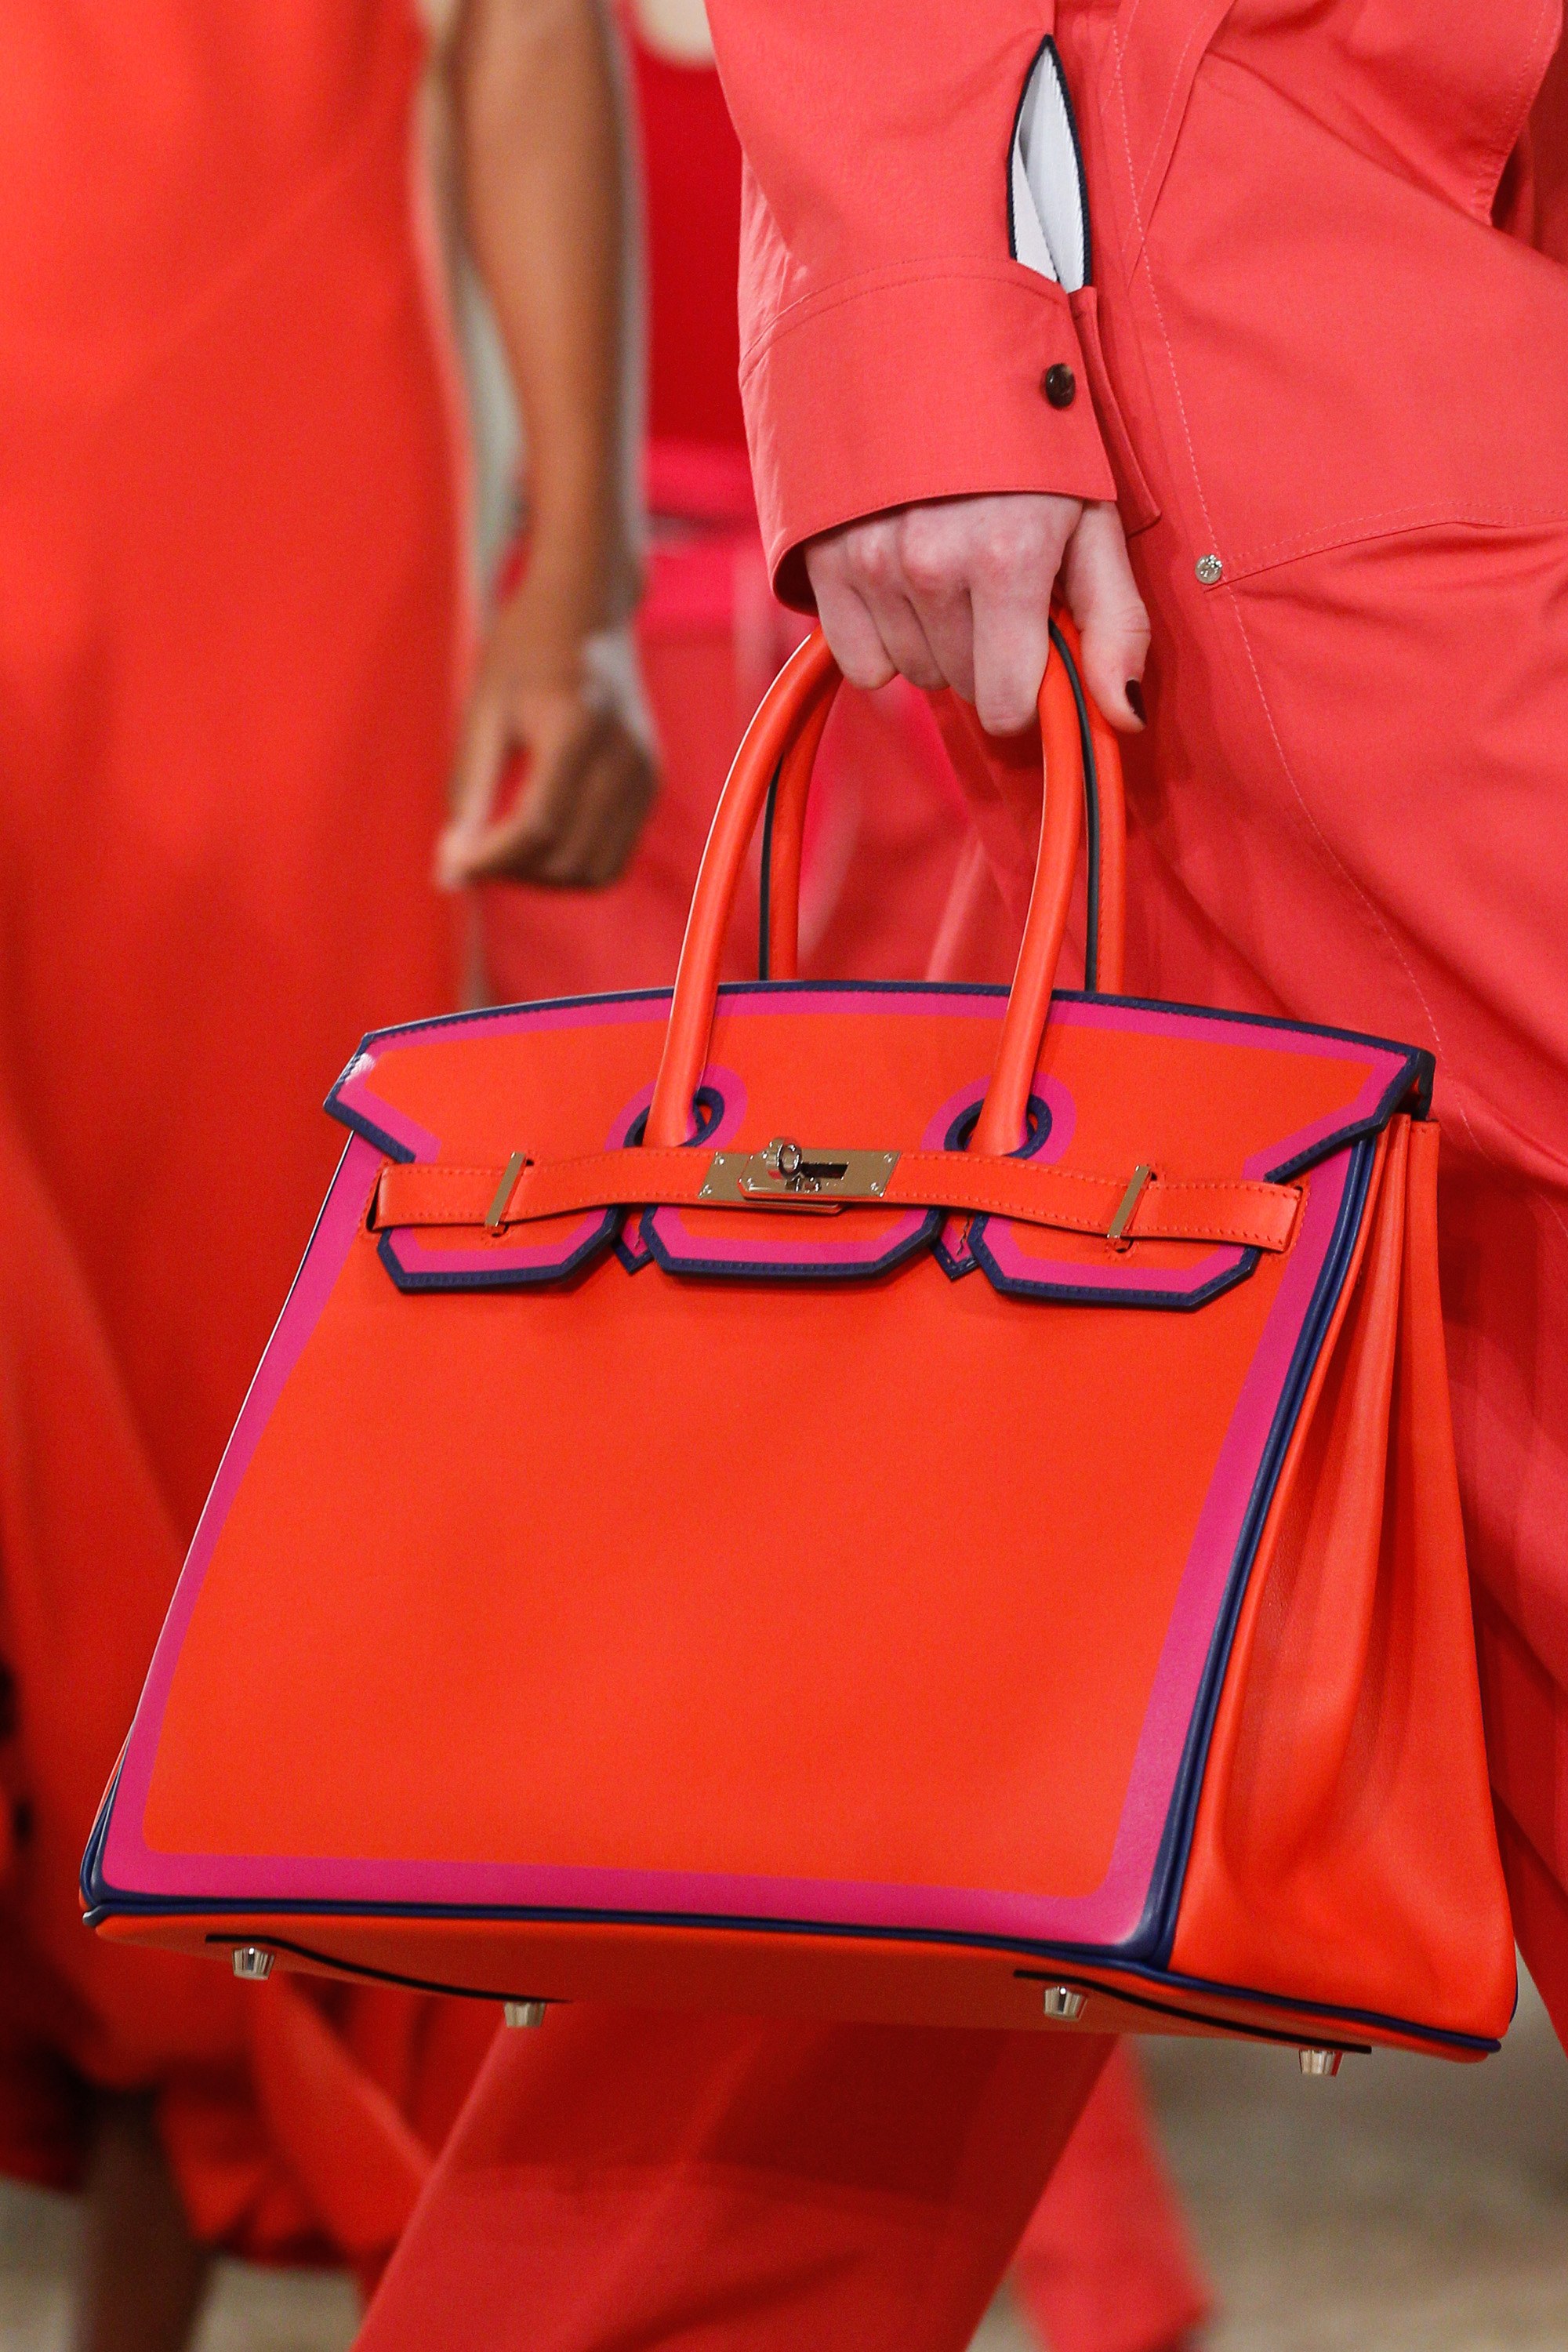 Hermes Resort 2018 Runway Bag Collection Includes Birkin with Piping | Spotted Fashion